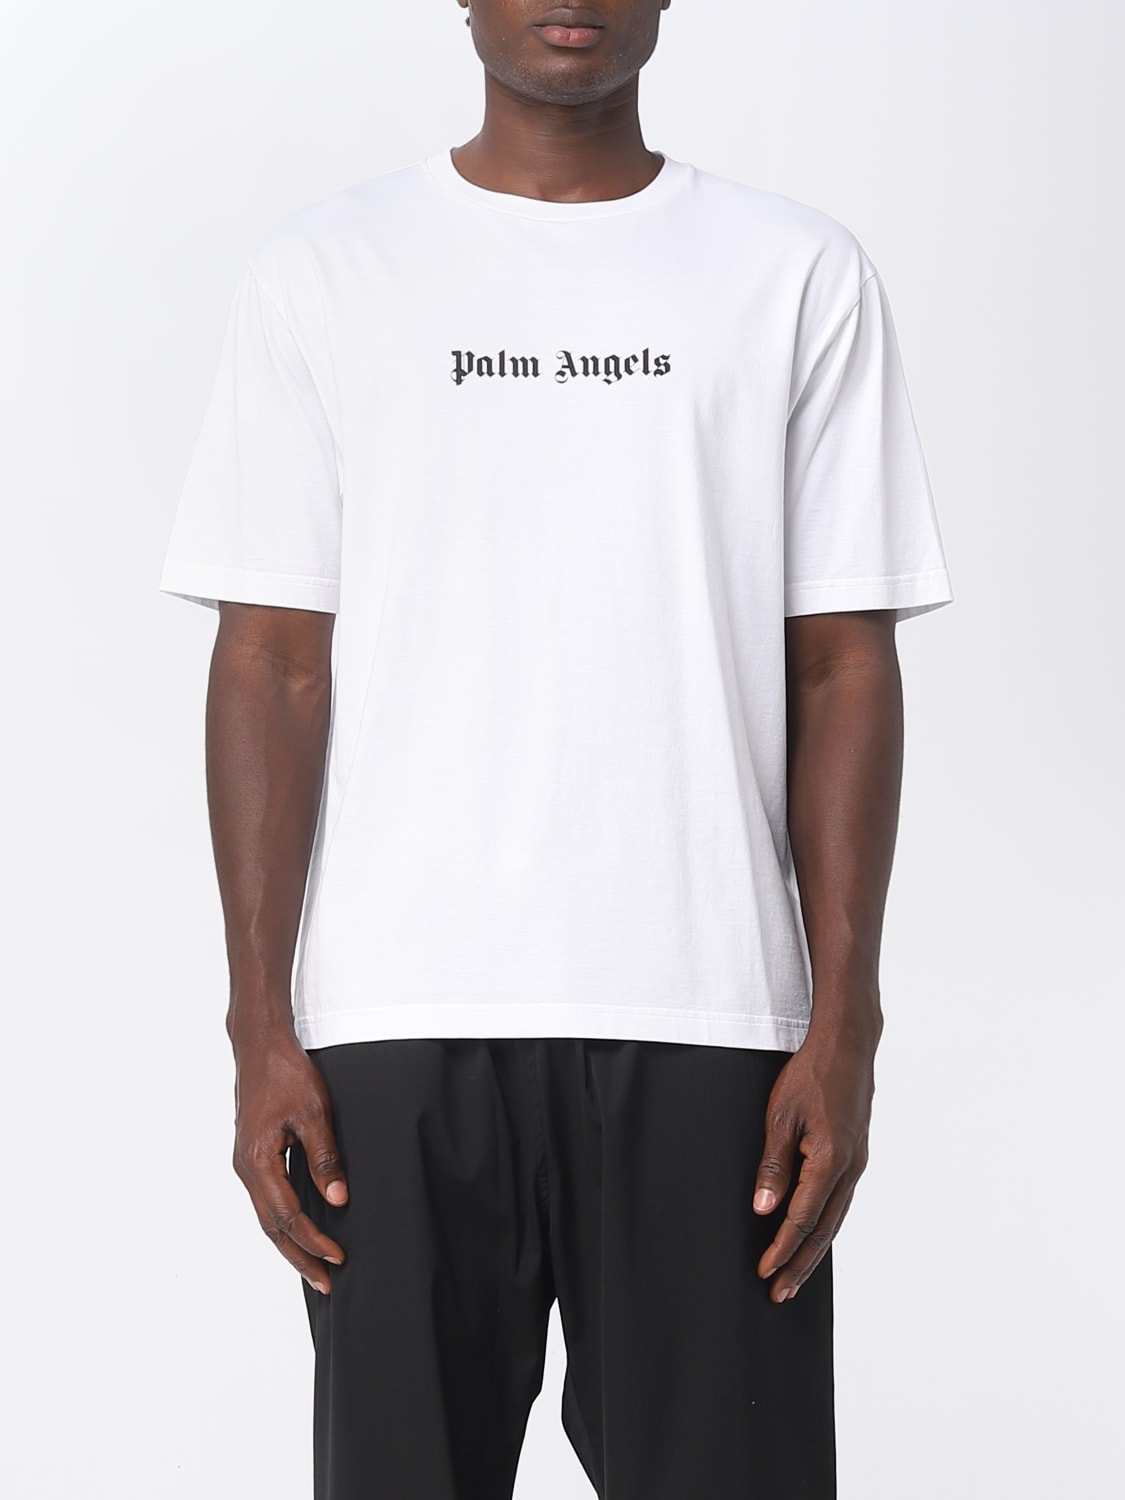 Palm Angels cotton T-shirt with printed logo